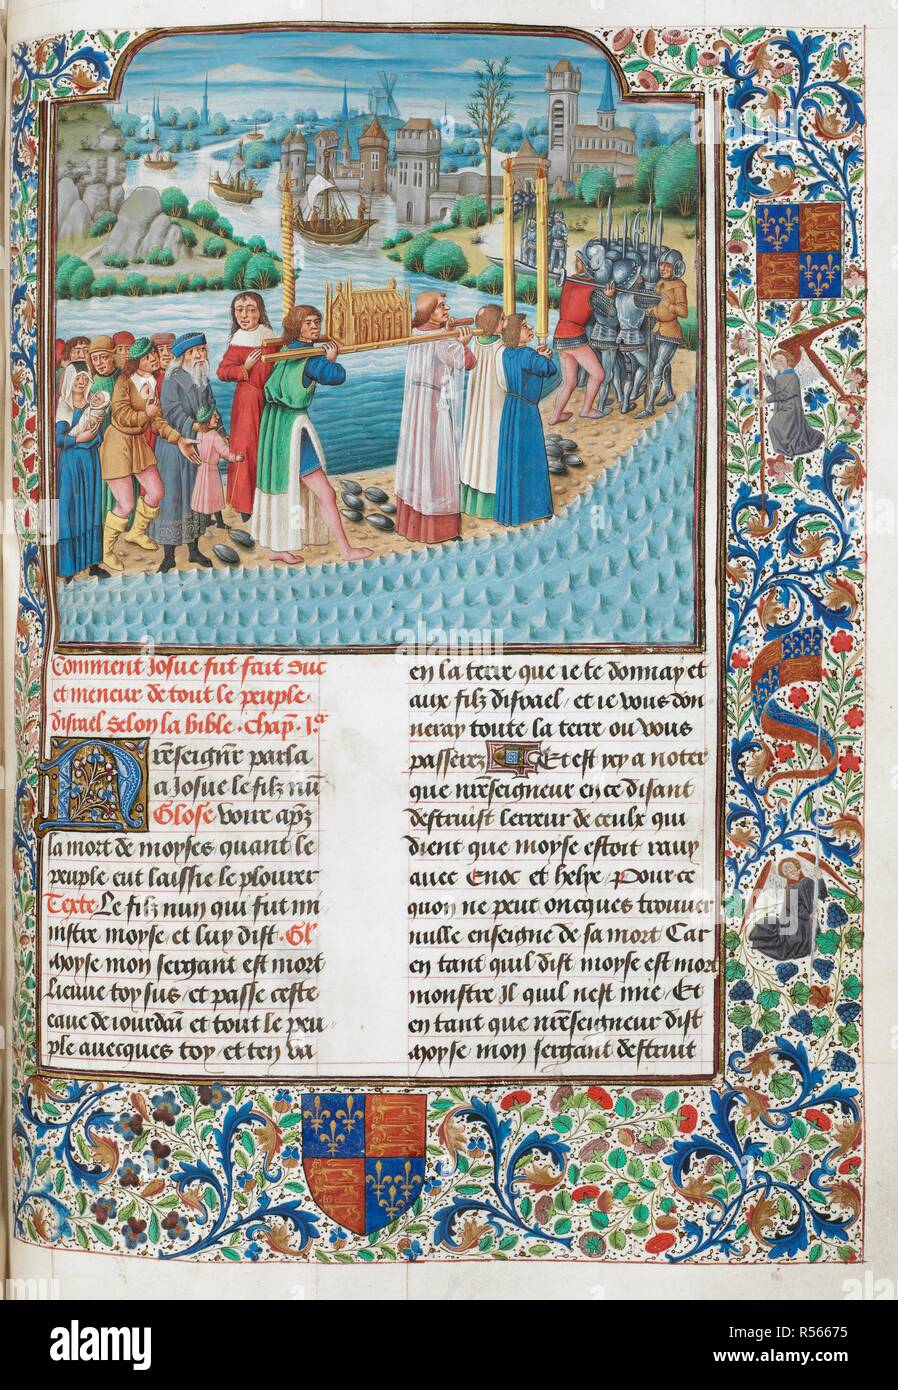 Joshua on the banks of the River Jordan with the Ark of the Covenant carried by a group of Israelites, at the beginning of Joshua . Bible Historiale, Volume 1. 1479. Source: Royal 18 D. IX, f.275. Language: French. Stock Photo